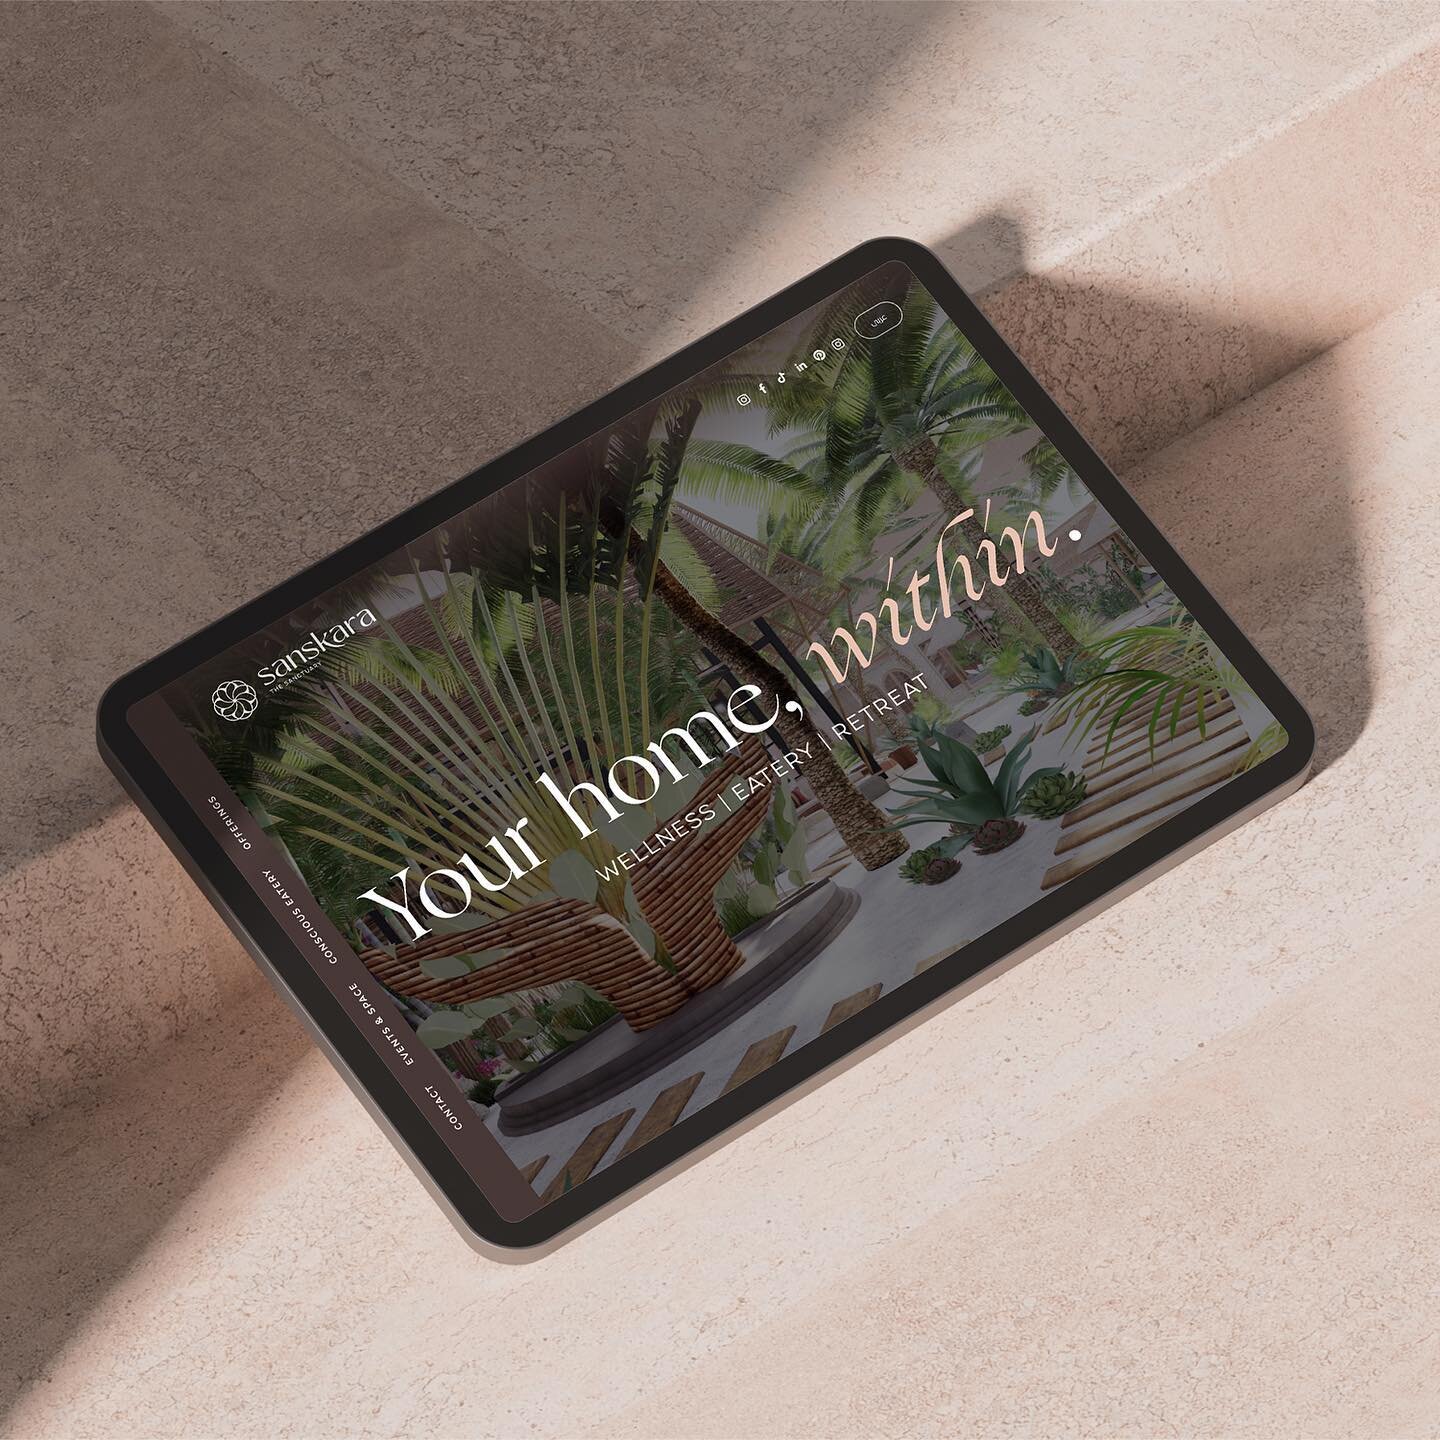 Located in the heart of Dubai, Sanskara sets a new standard for wellness centres &amp; retreats around the world. 🧘&zwj;♀️

Web &amp; social strategy + templates by yours truly, @samaaroncreative ✨
Now booking for 2023 + 2024 &mdash; link in bio.